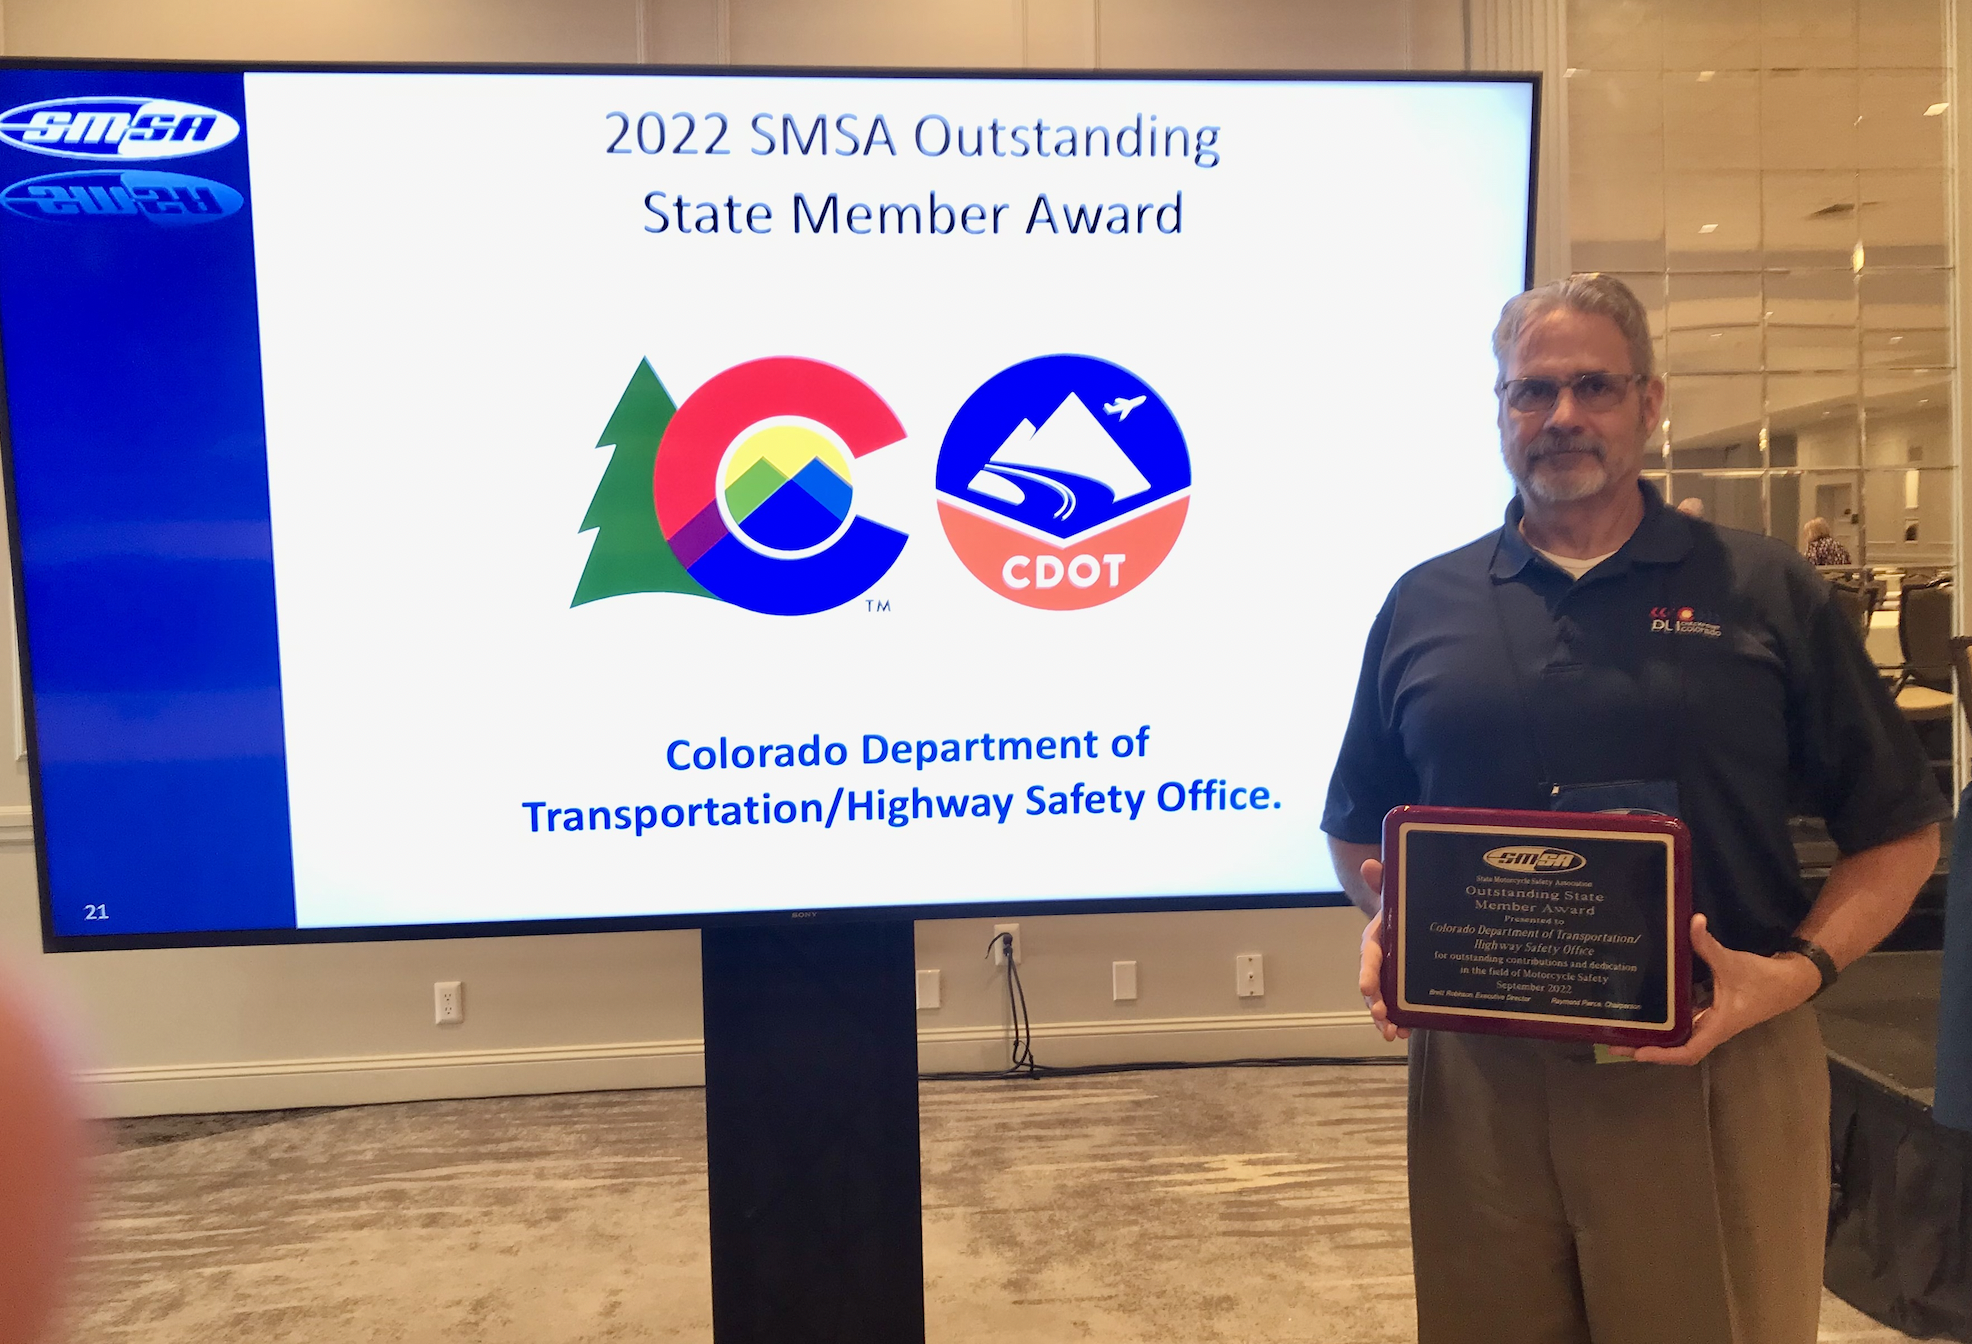 Highway Safety Office as finalists in the State Motorcycle Safety Association state program of the year detail image